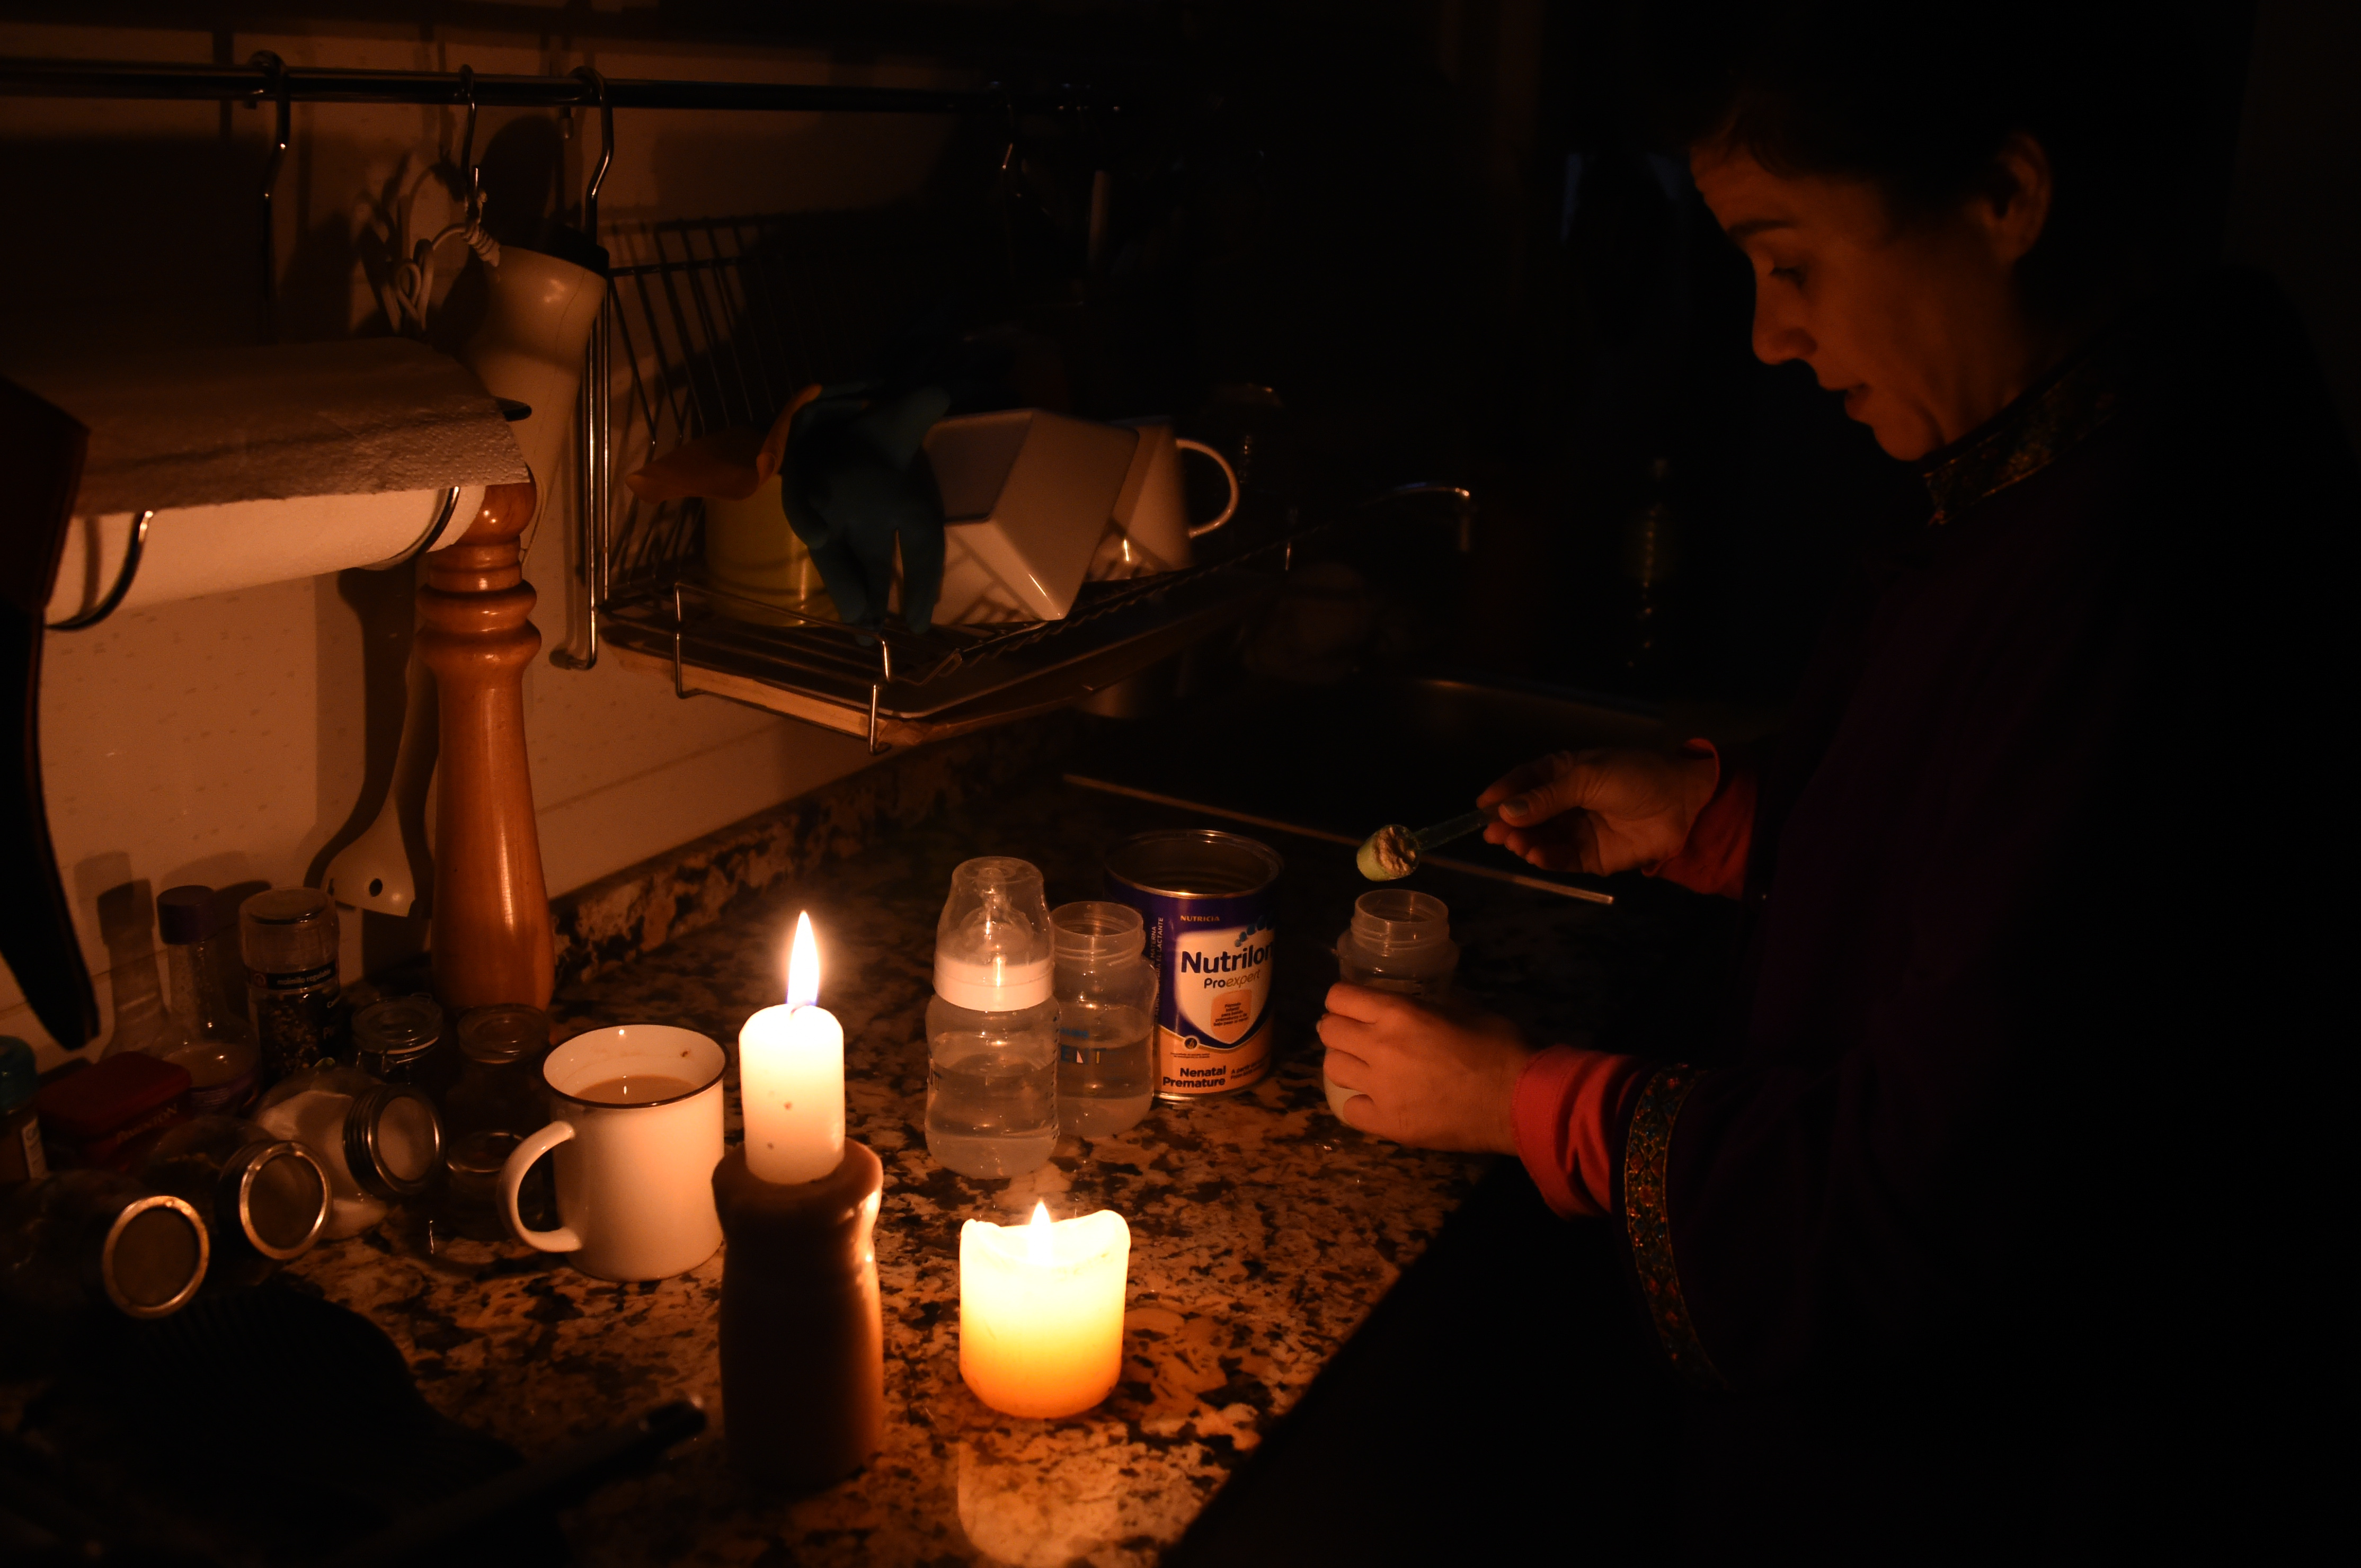 A woman prepares milk bottles using candles at her home in Montevideo on June 16, 2019 during a power cut. (MIGUEL ROJO/AFP/Getty Images)